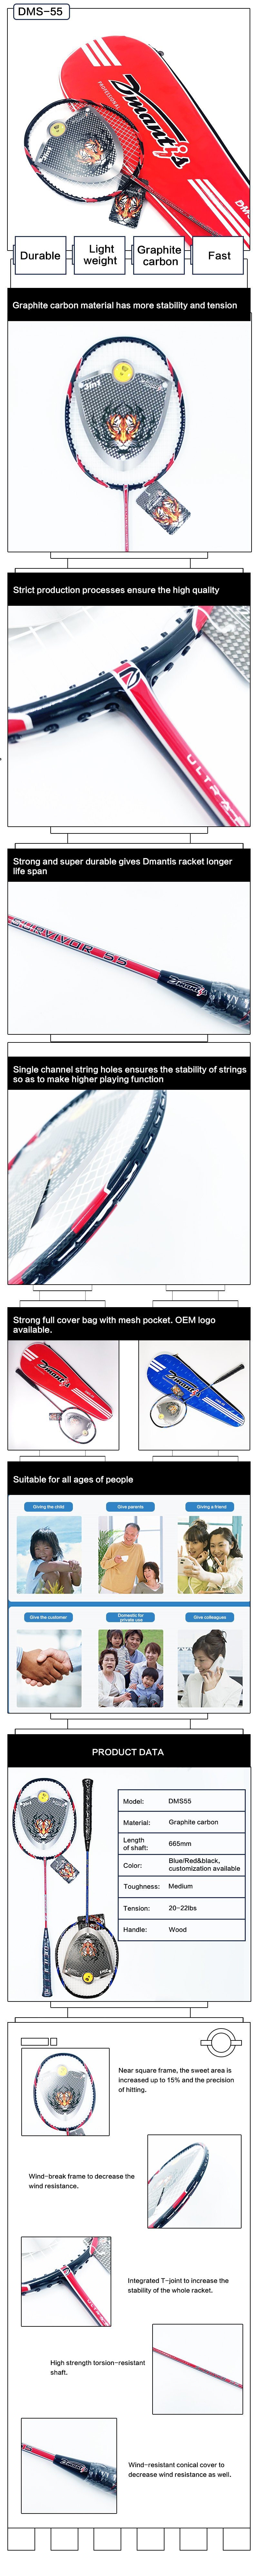 Wholesale Customized High Quality Offensive/Attacking Graphite/Carbon Fiber Badminton Racket